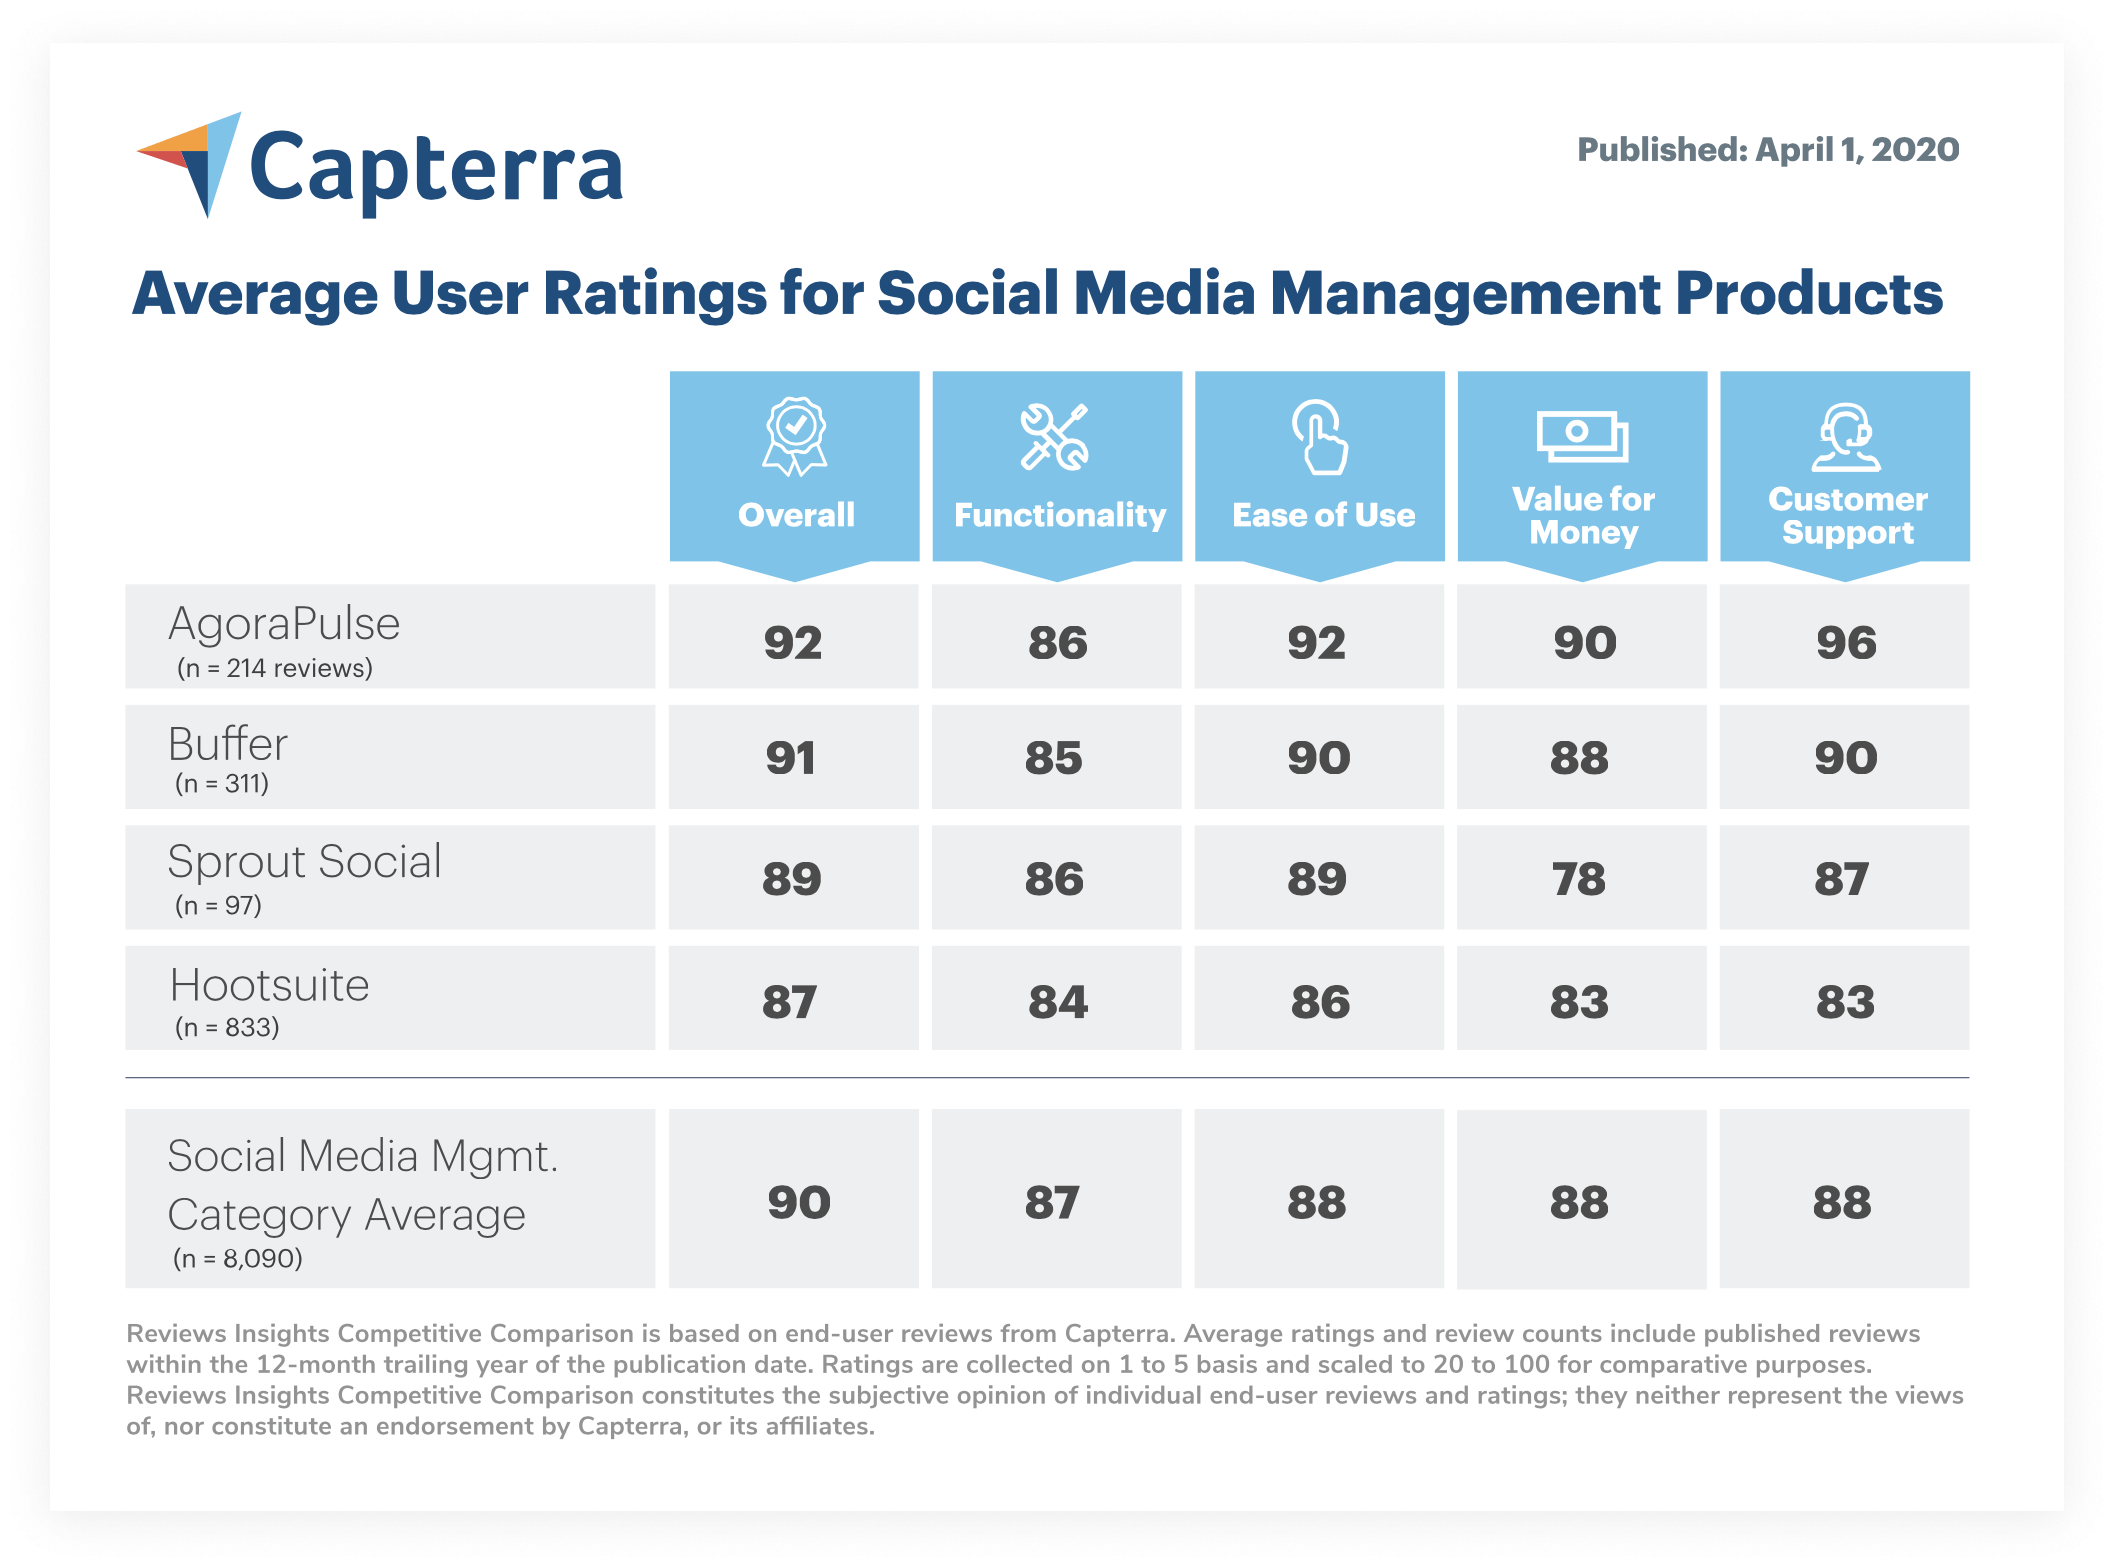 Capterra ratings chart for social media management tools, showing user scores for AgoraPulse, Buffer, Sprout Social, and Hootsuite across various performance metrics, published on April 1, 2020.